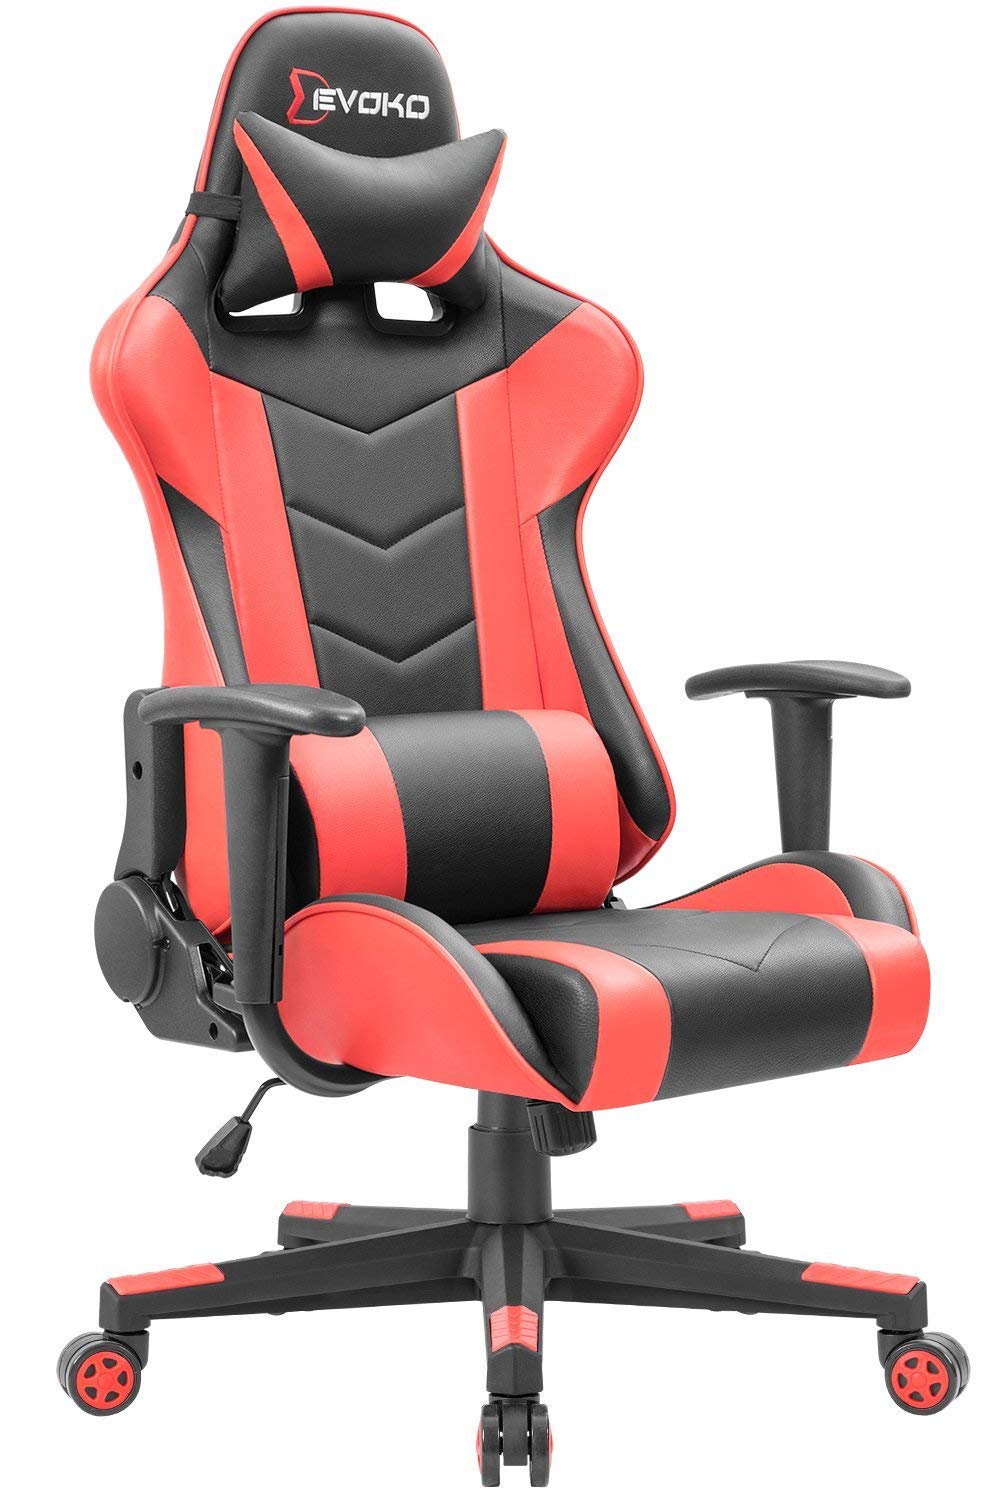 Wooden Best Computer Gaming Chair On Amazon for Streamer